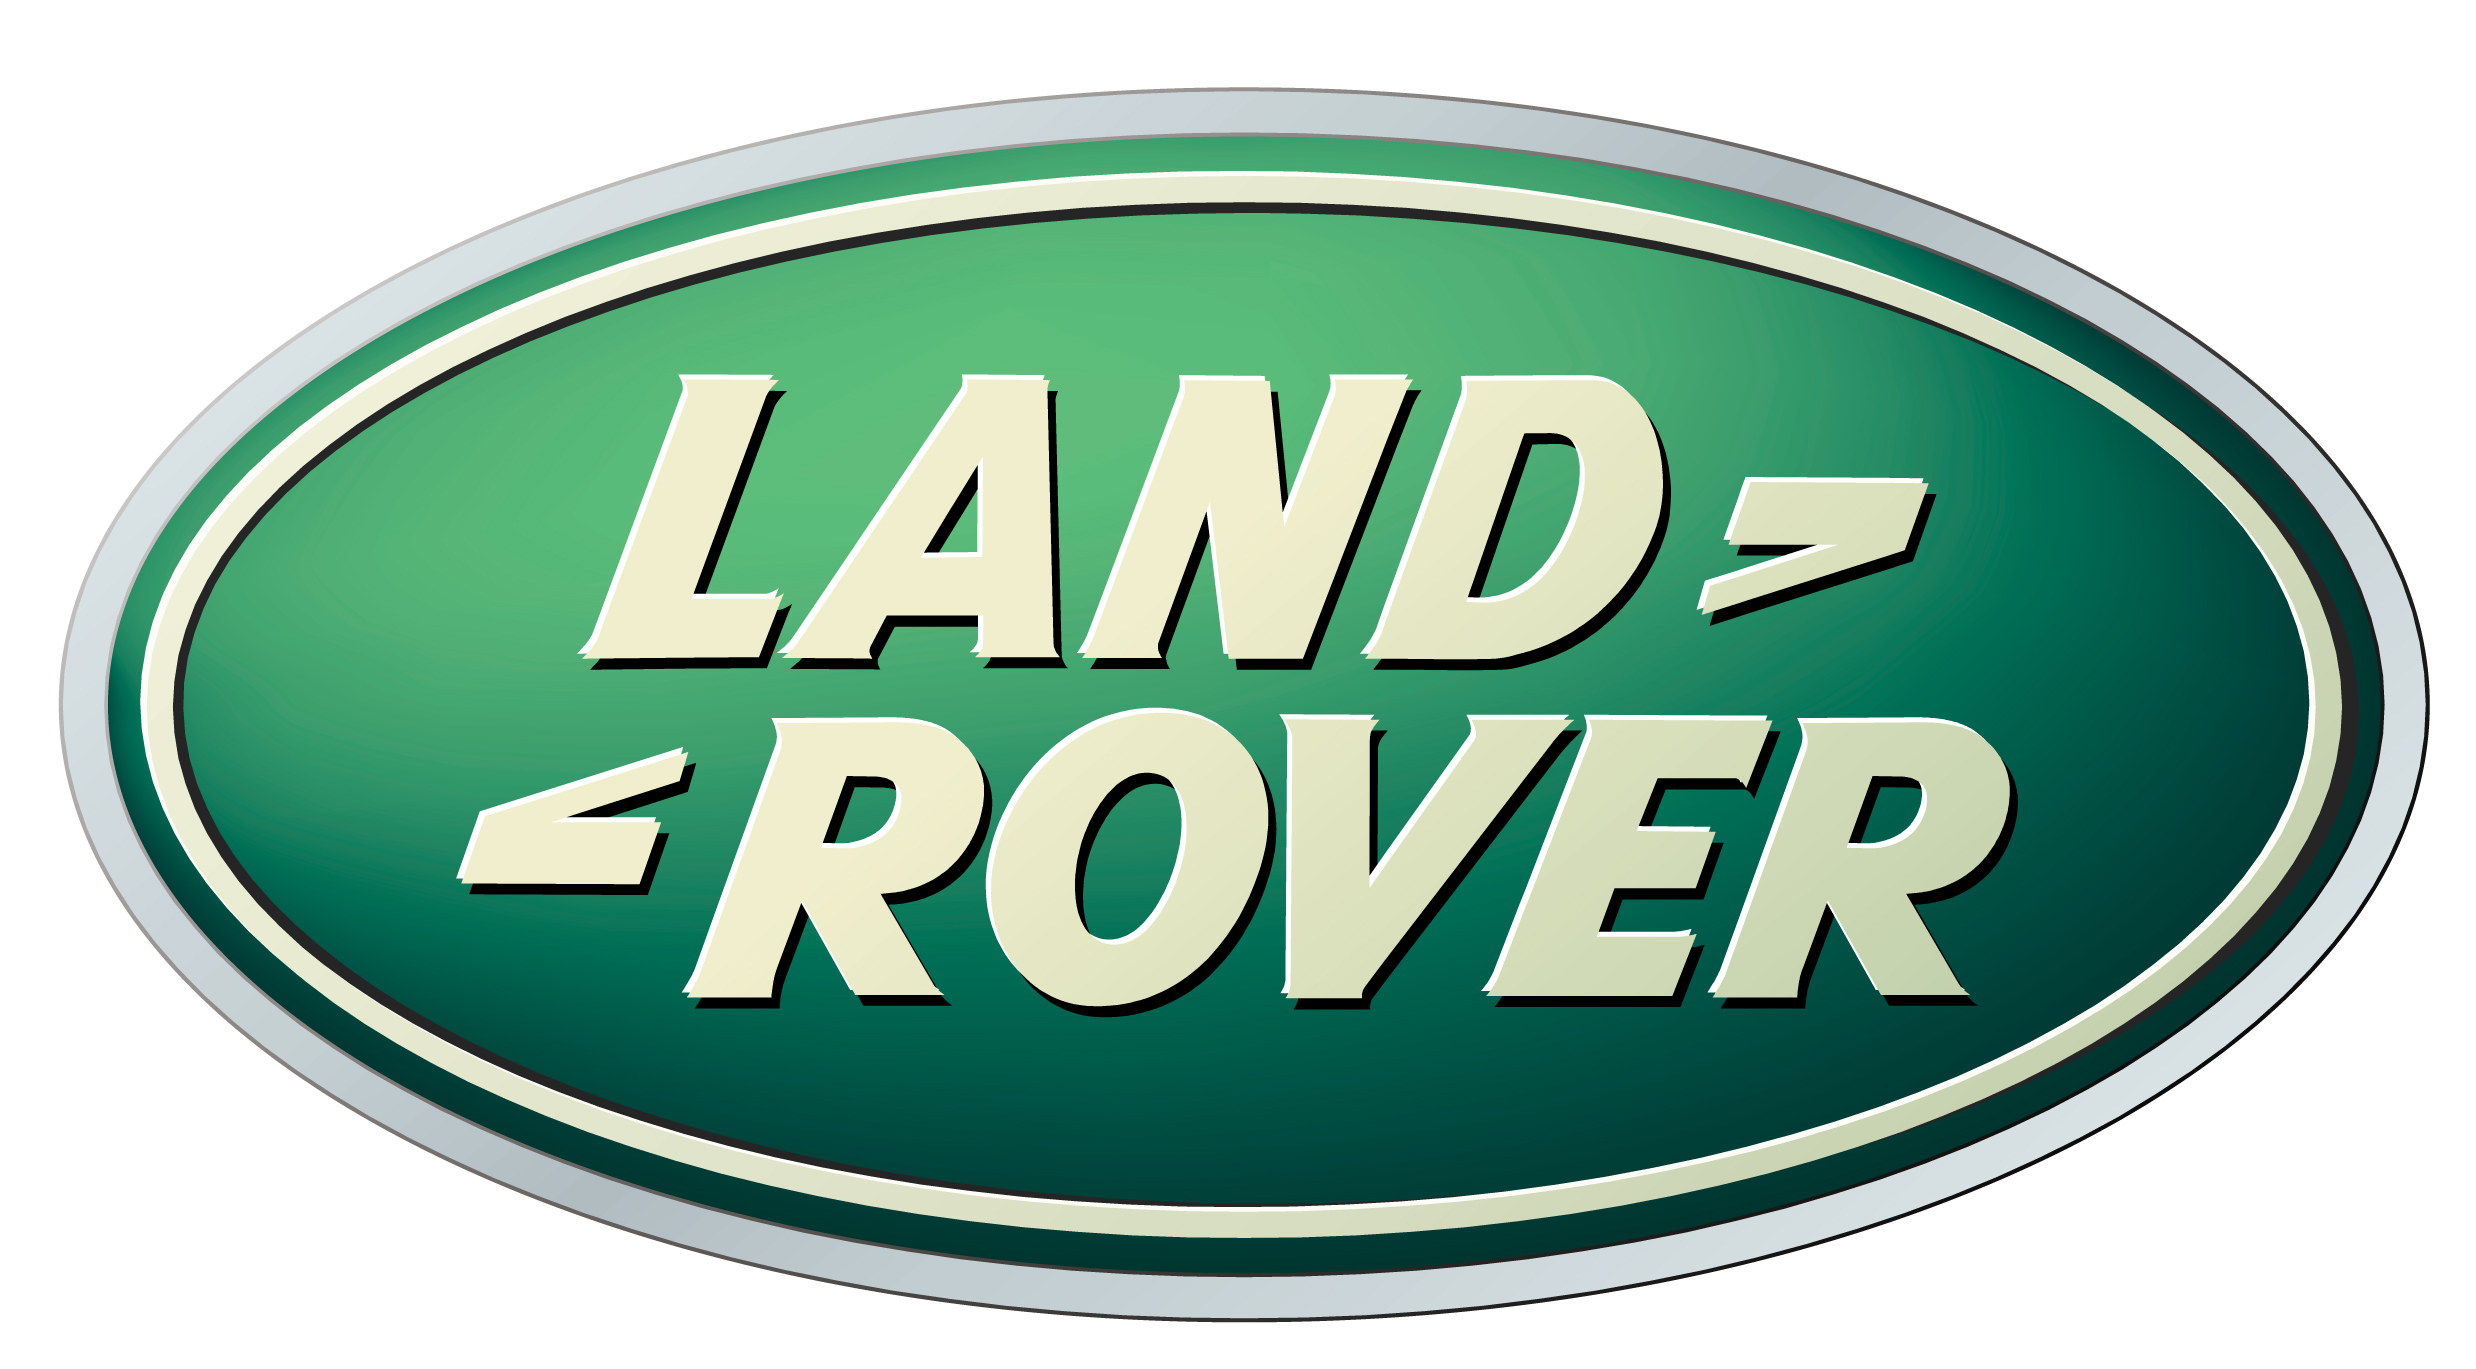 Landrover.png